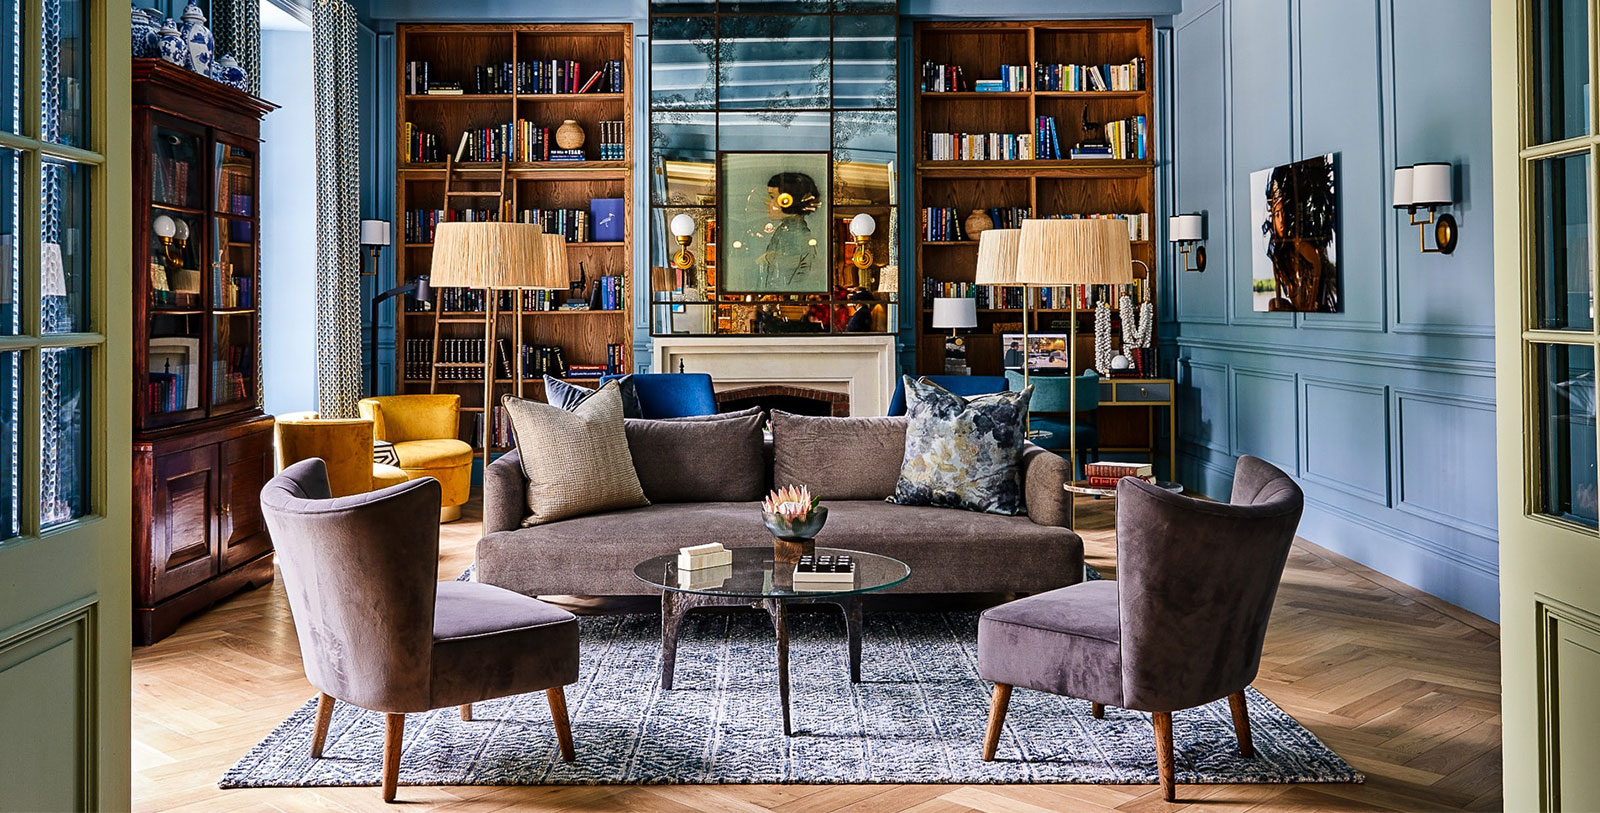 Image of hotel library at Erinvale Estate Hotel & Spa, 1666, Member of Historic Hotels Worldwide, Somerset West, South Africa, Experience